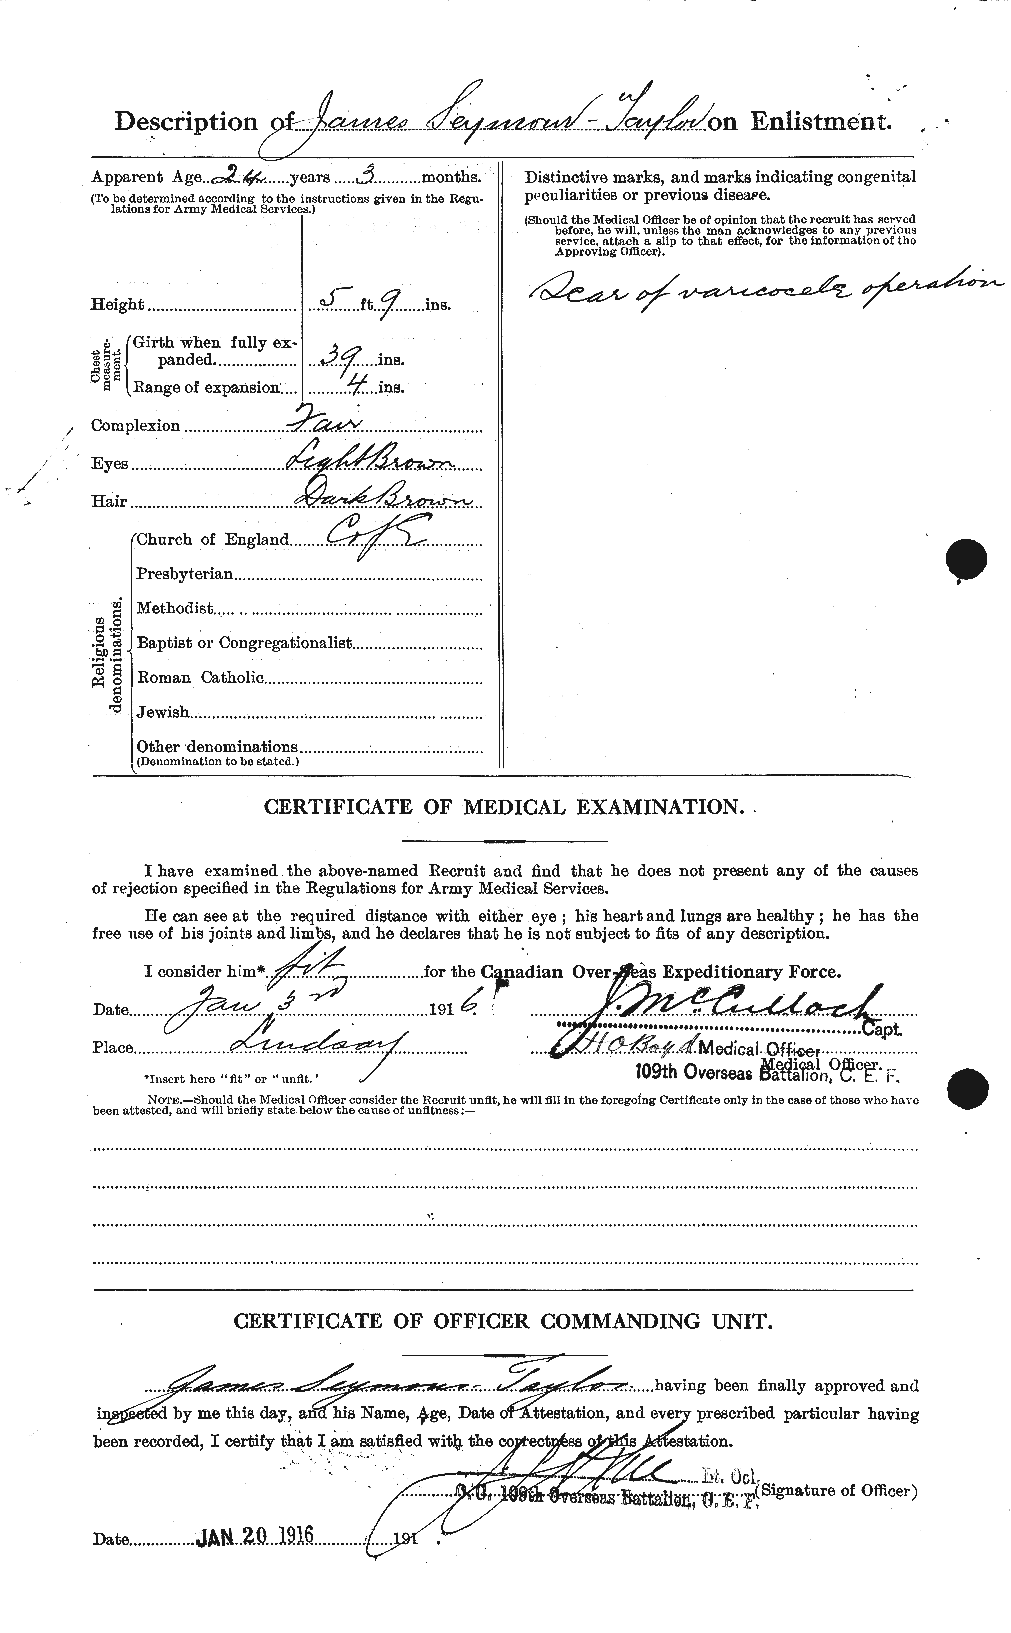 Personnel Records of the First World War - CEF 088279b